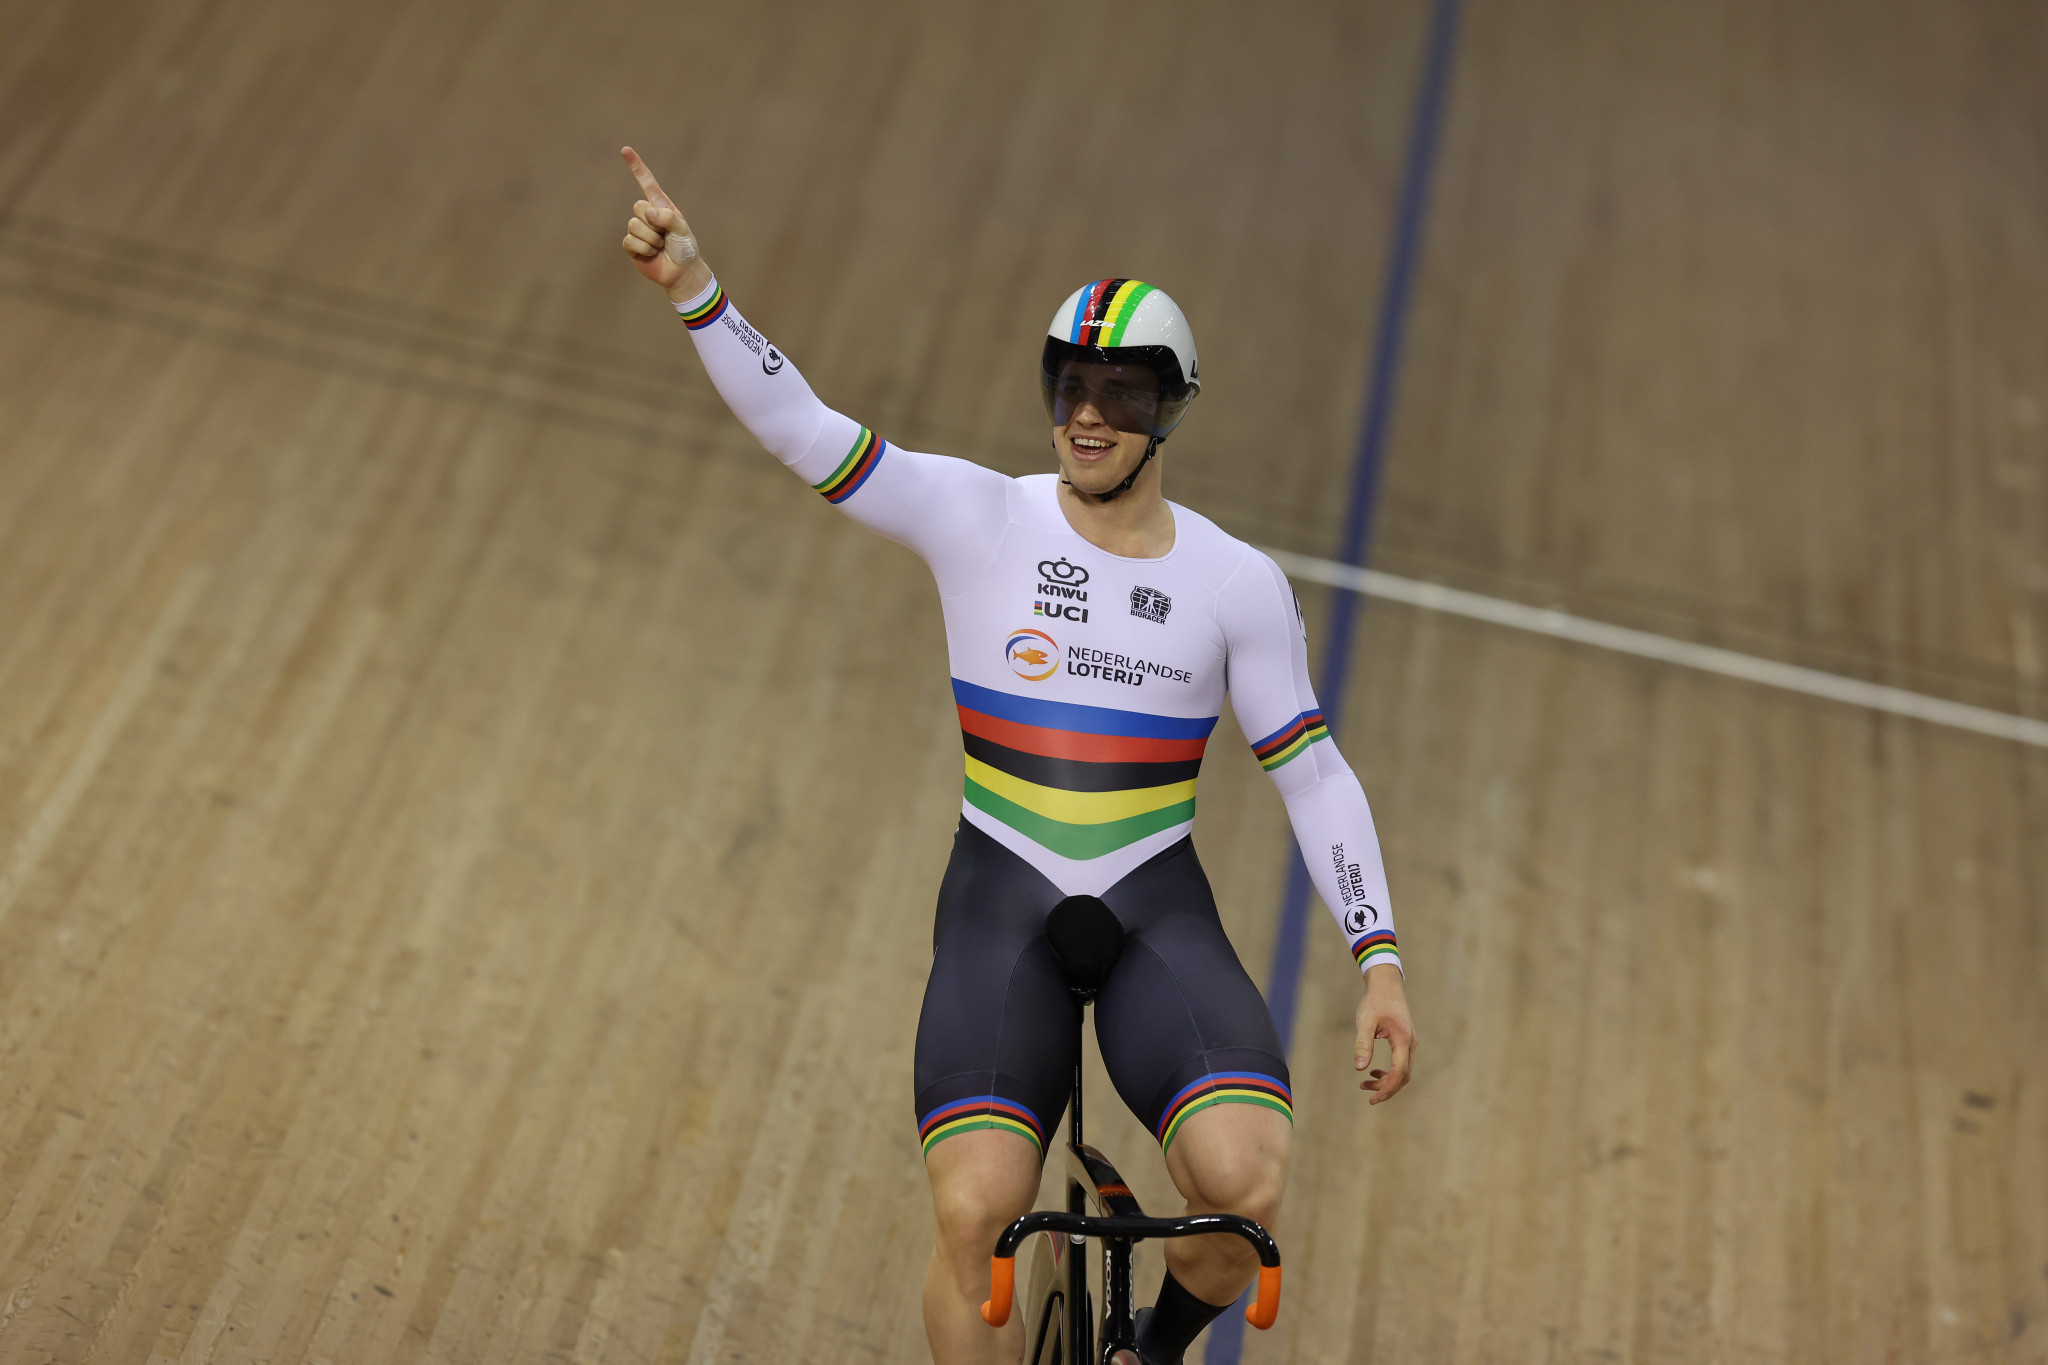 Dutch Olympic champions Lavreysen and Hoogland striving for gold at UCI Track Cycling Nations Cup in Cali